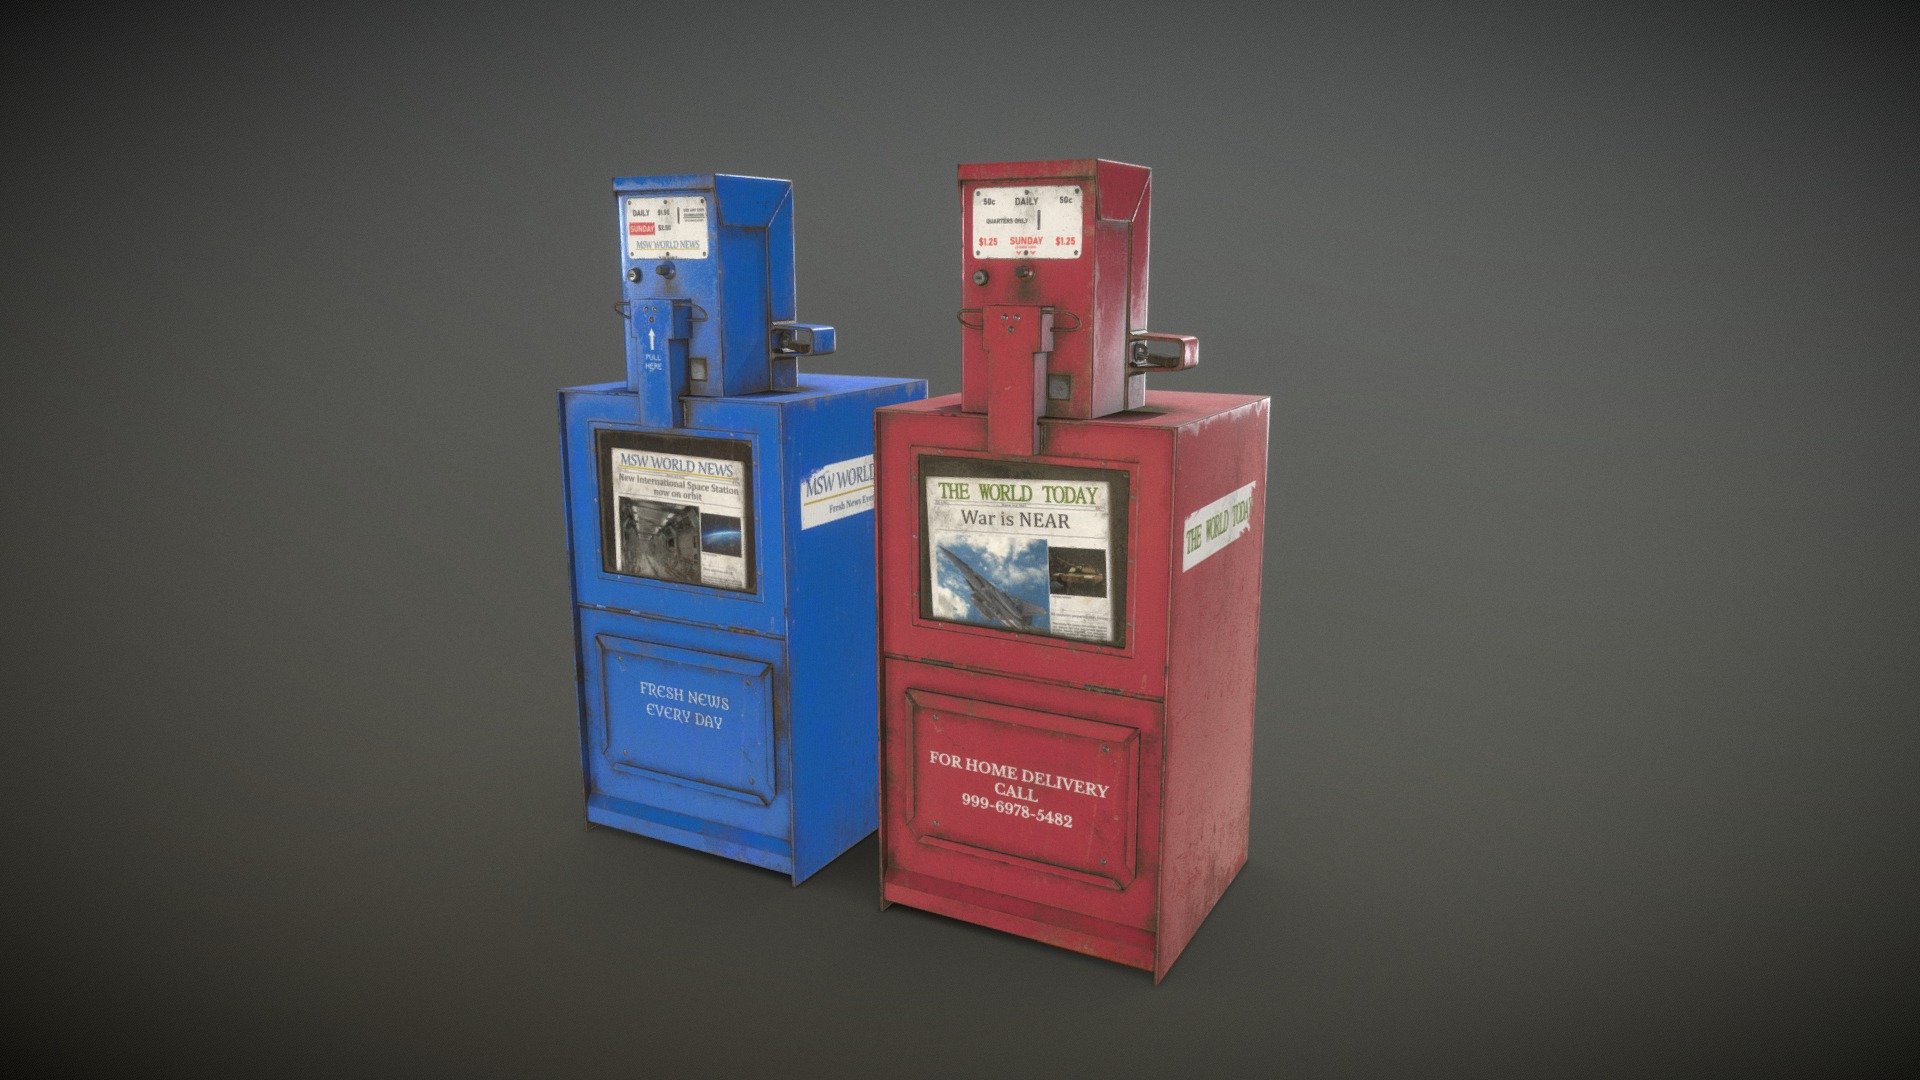 Game Ready Newspaper Dispenser:

Low poly 3d model of a Newspaper Dispenser with 4 PBR texture sets. 2 different colors and 2 levels of dirt on each:




Real-world scale and centered.

The unit of measurement used for the model is centimeters.

Polys: 517 (Converted to triangles: 1.022) - Each machine

Textured in Substance Painter.

All branding and labels are custom made.

2 PBR materials (blue and red) with 2 levels of dirt and 2048x2048 textures.

Provided Maps (cleand and dirty):




Albedo

Normal

Roughness

Metalness

AO

Formats Incuded - MAX / BLEND / OBJ / FBX / 3DS

All my models have an average texel density that ranges between 512 and 1024.

Other formats available upon request.

This model can be used for any game, film, personal project, etc. You may not resell or redistribute any content - Newspaper Dispenser - Low Poly - Buy Royalty Free 3D model by MSWoodvine 3d model